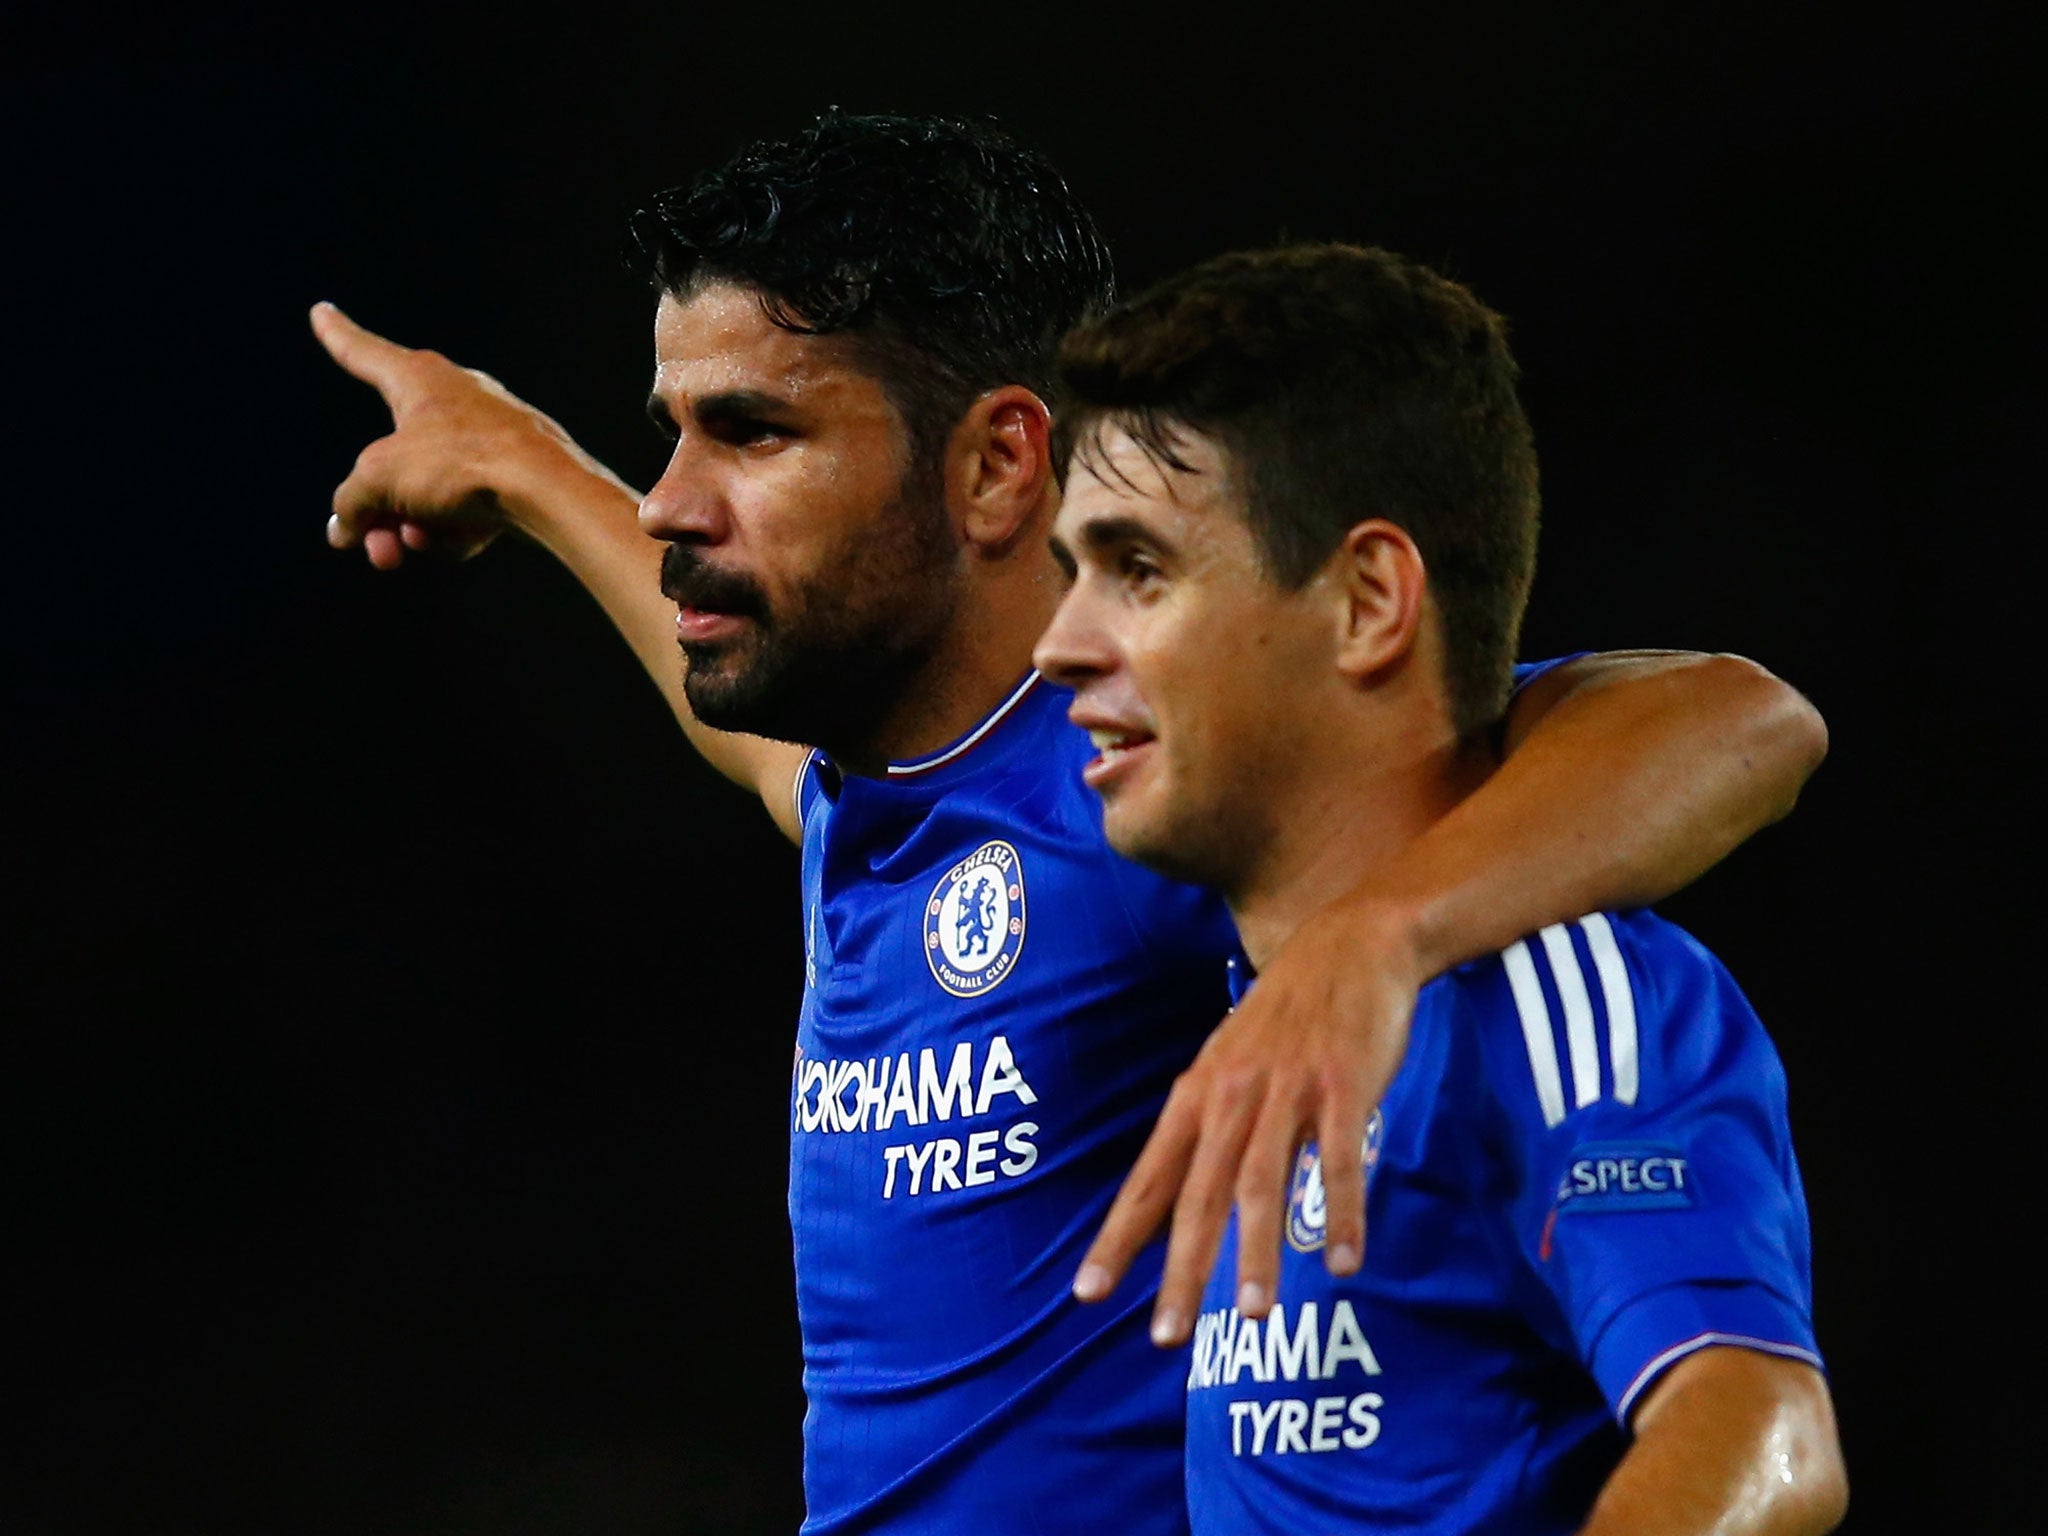 Chelsea’s Diego Costa, left, and Oscar remain ‘best friends’, according to the latter, but accusations of disharmony have dogged the team this season